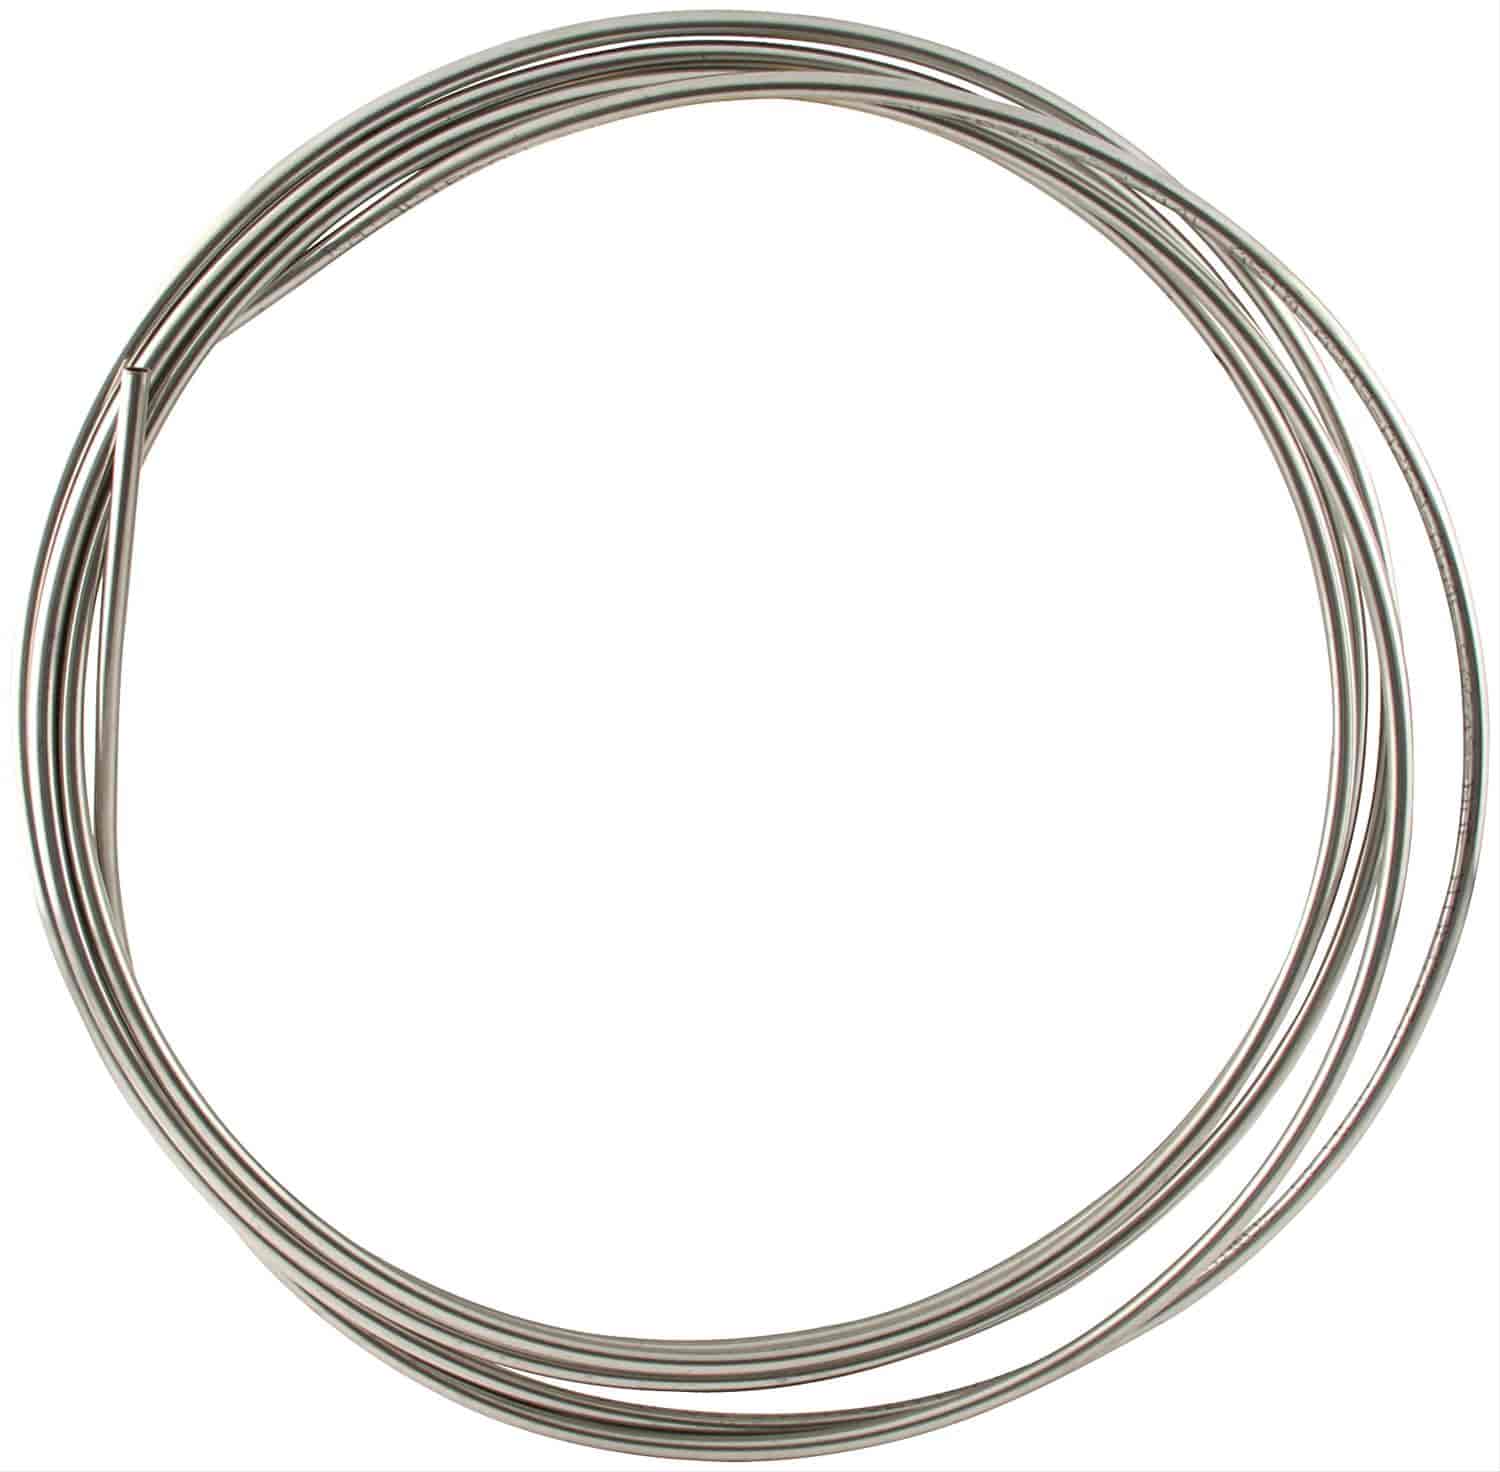 Stainless Steel Fuel Line Coil Length: 20 ft.